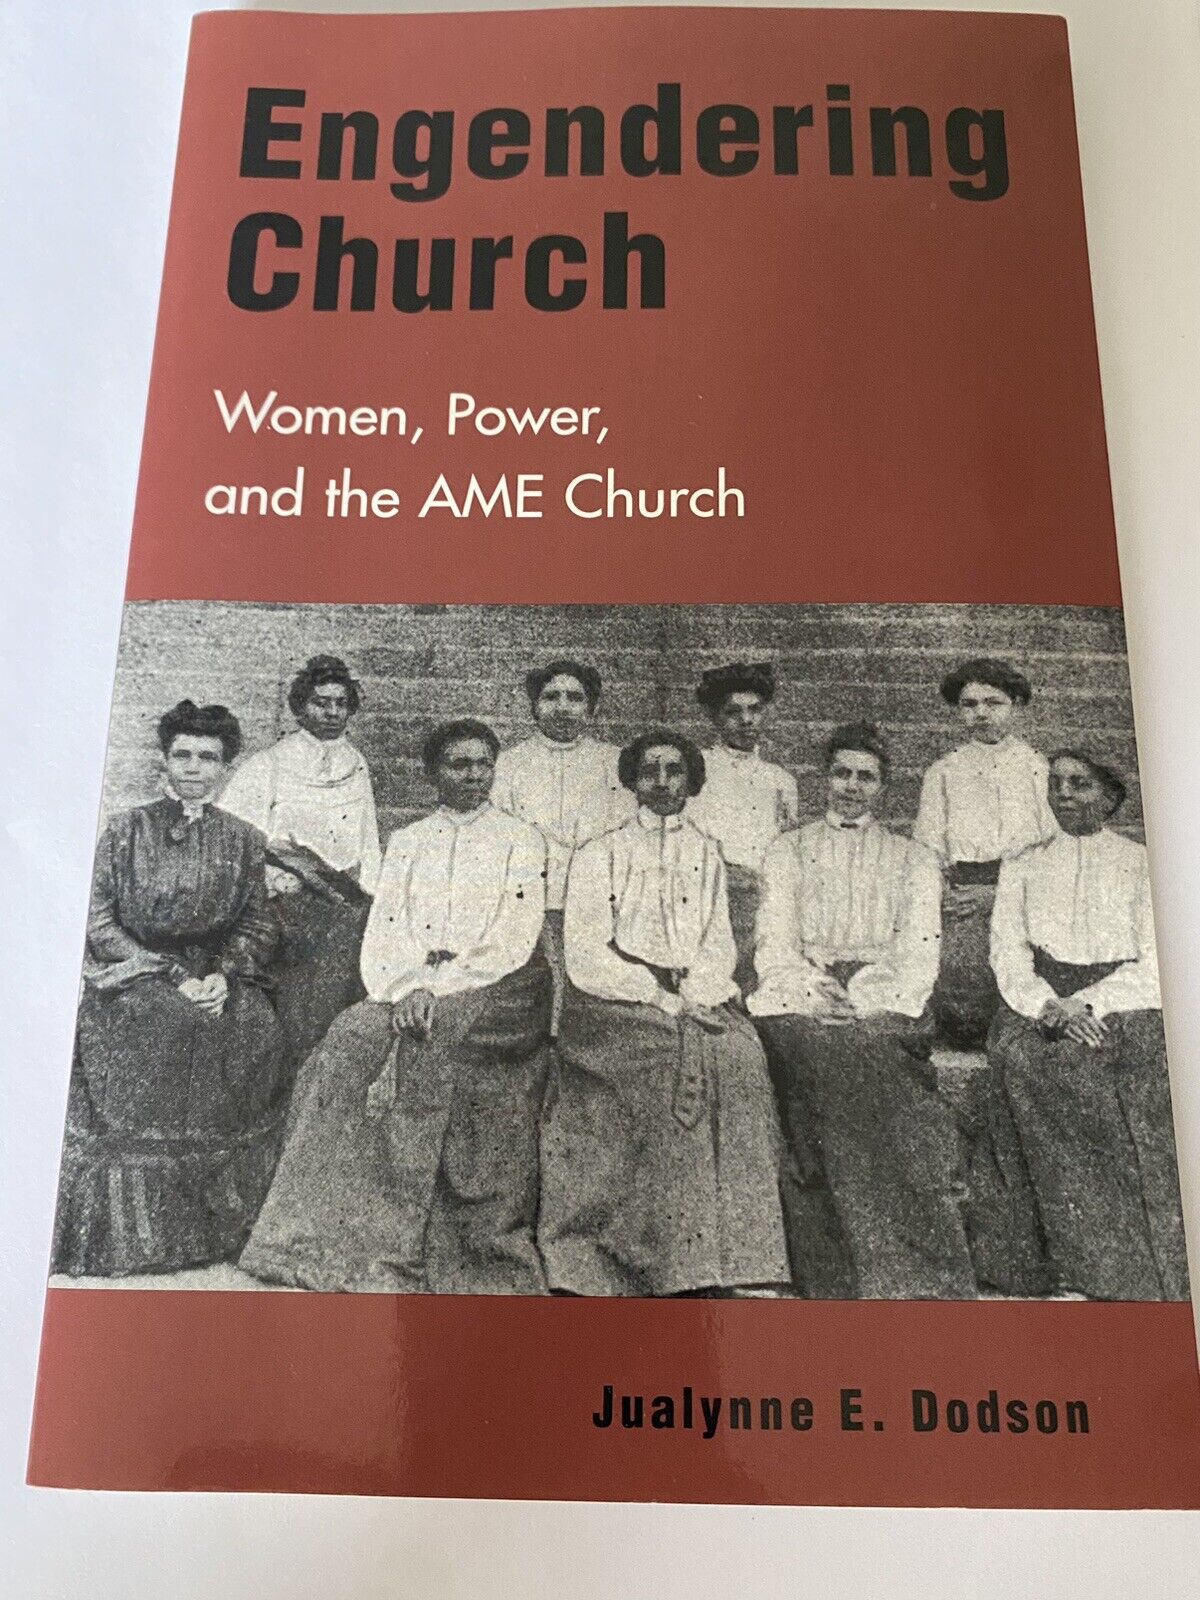 Engendering Church: Women, Power and the AME Church, Jualynne E. Dodson